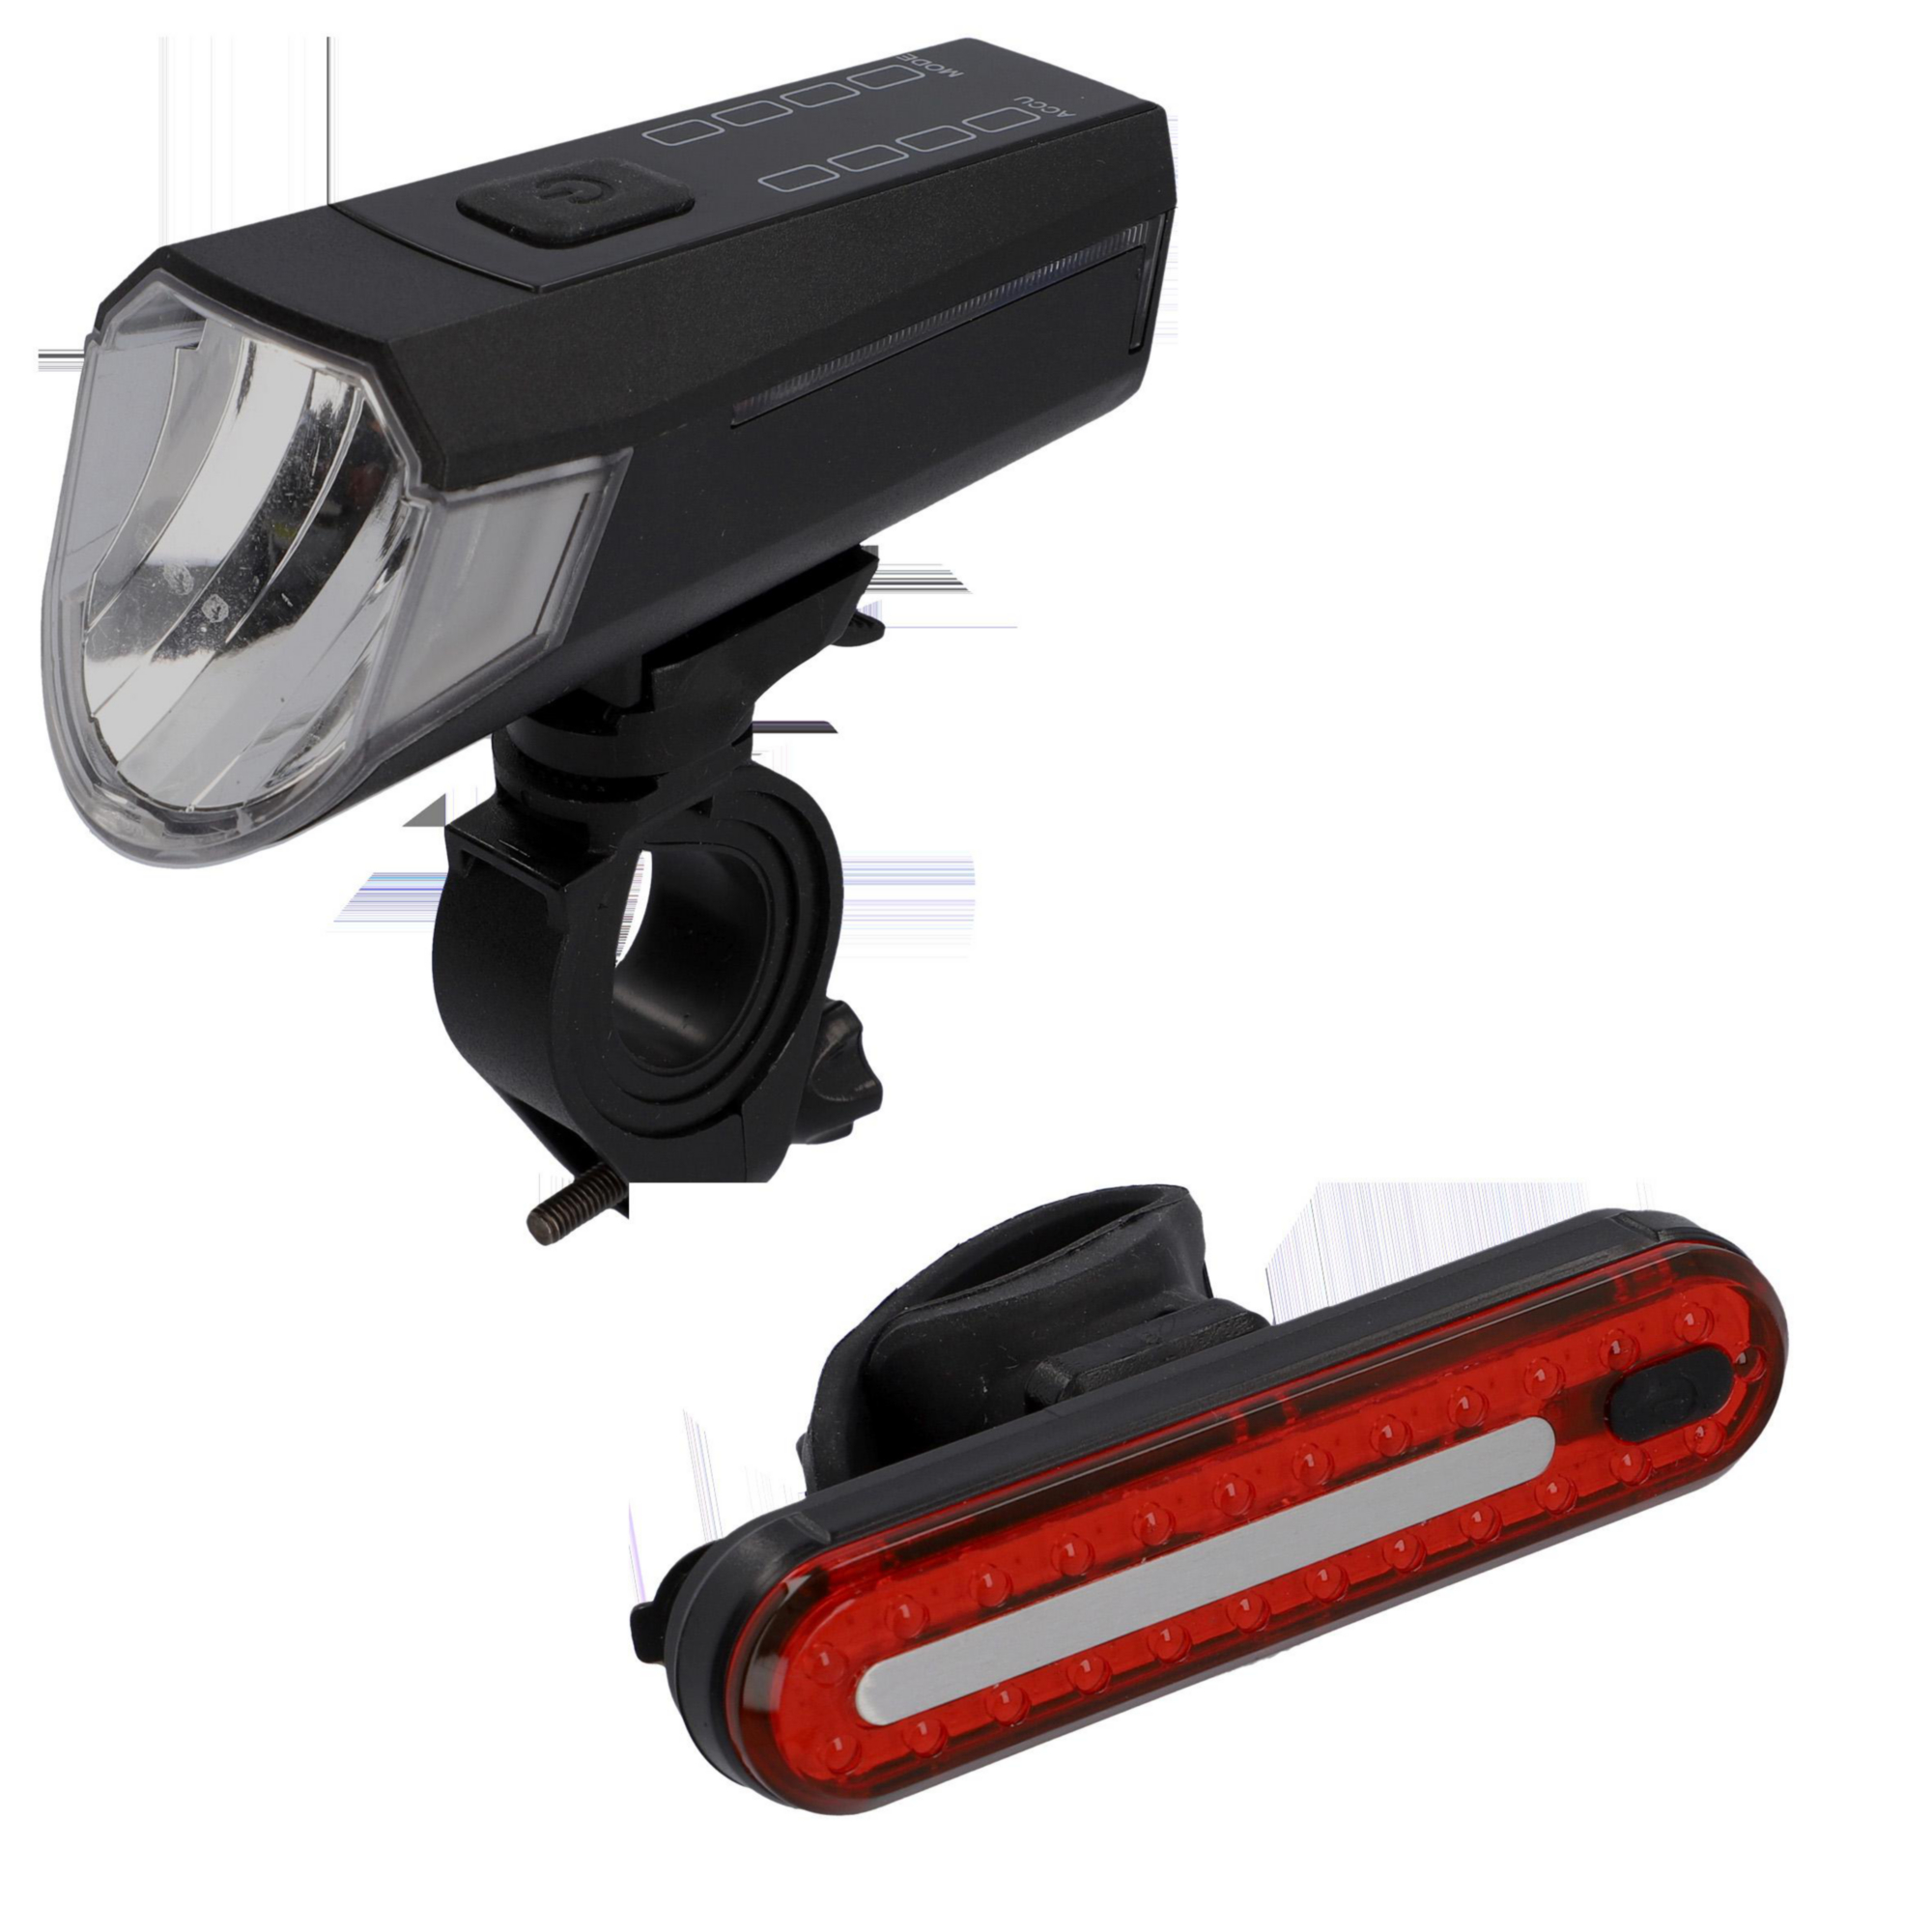 LED Beleuchtungs-Set 'Stop' Akku 80/40/20 Lux mit Lichtsensor + product picture